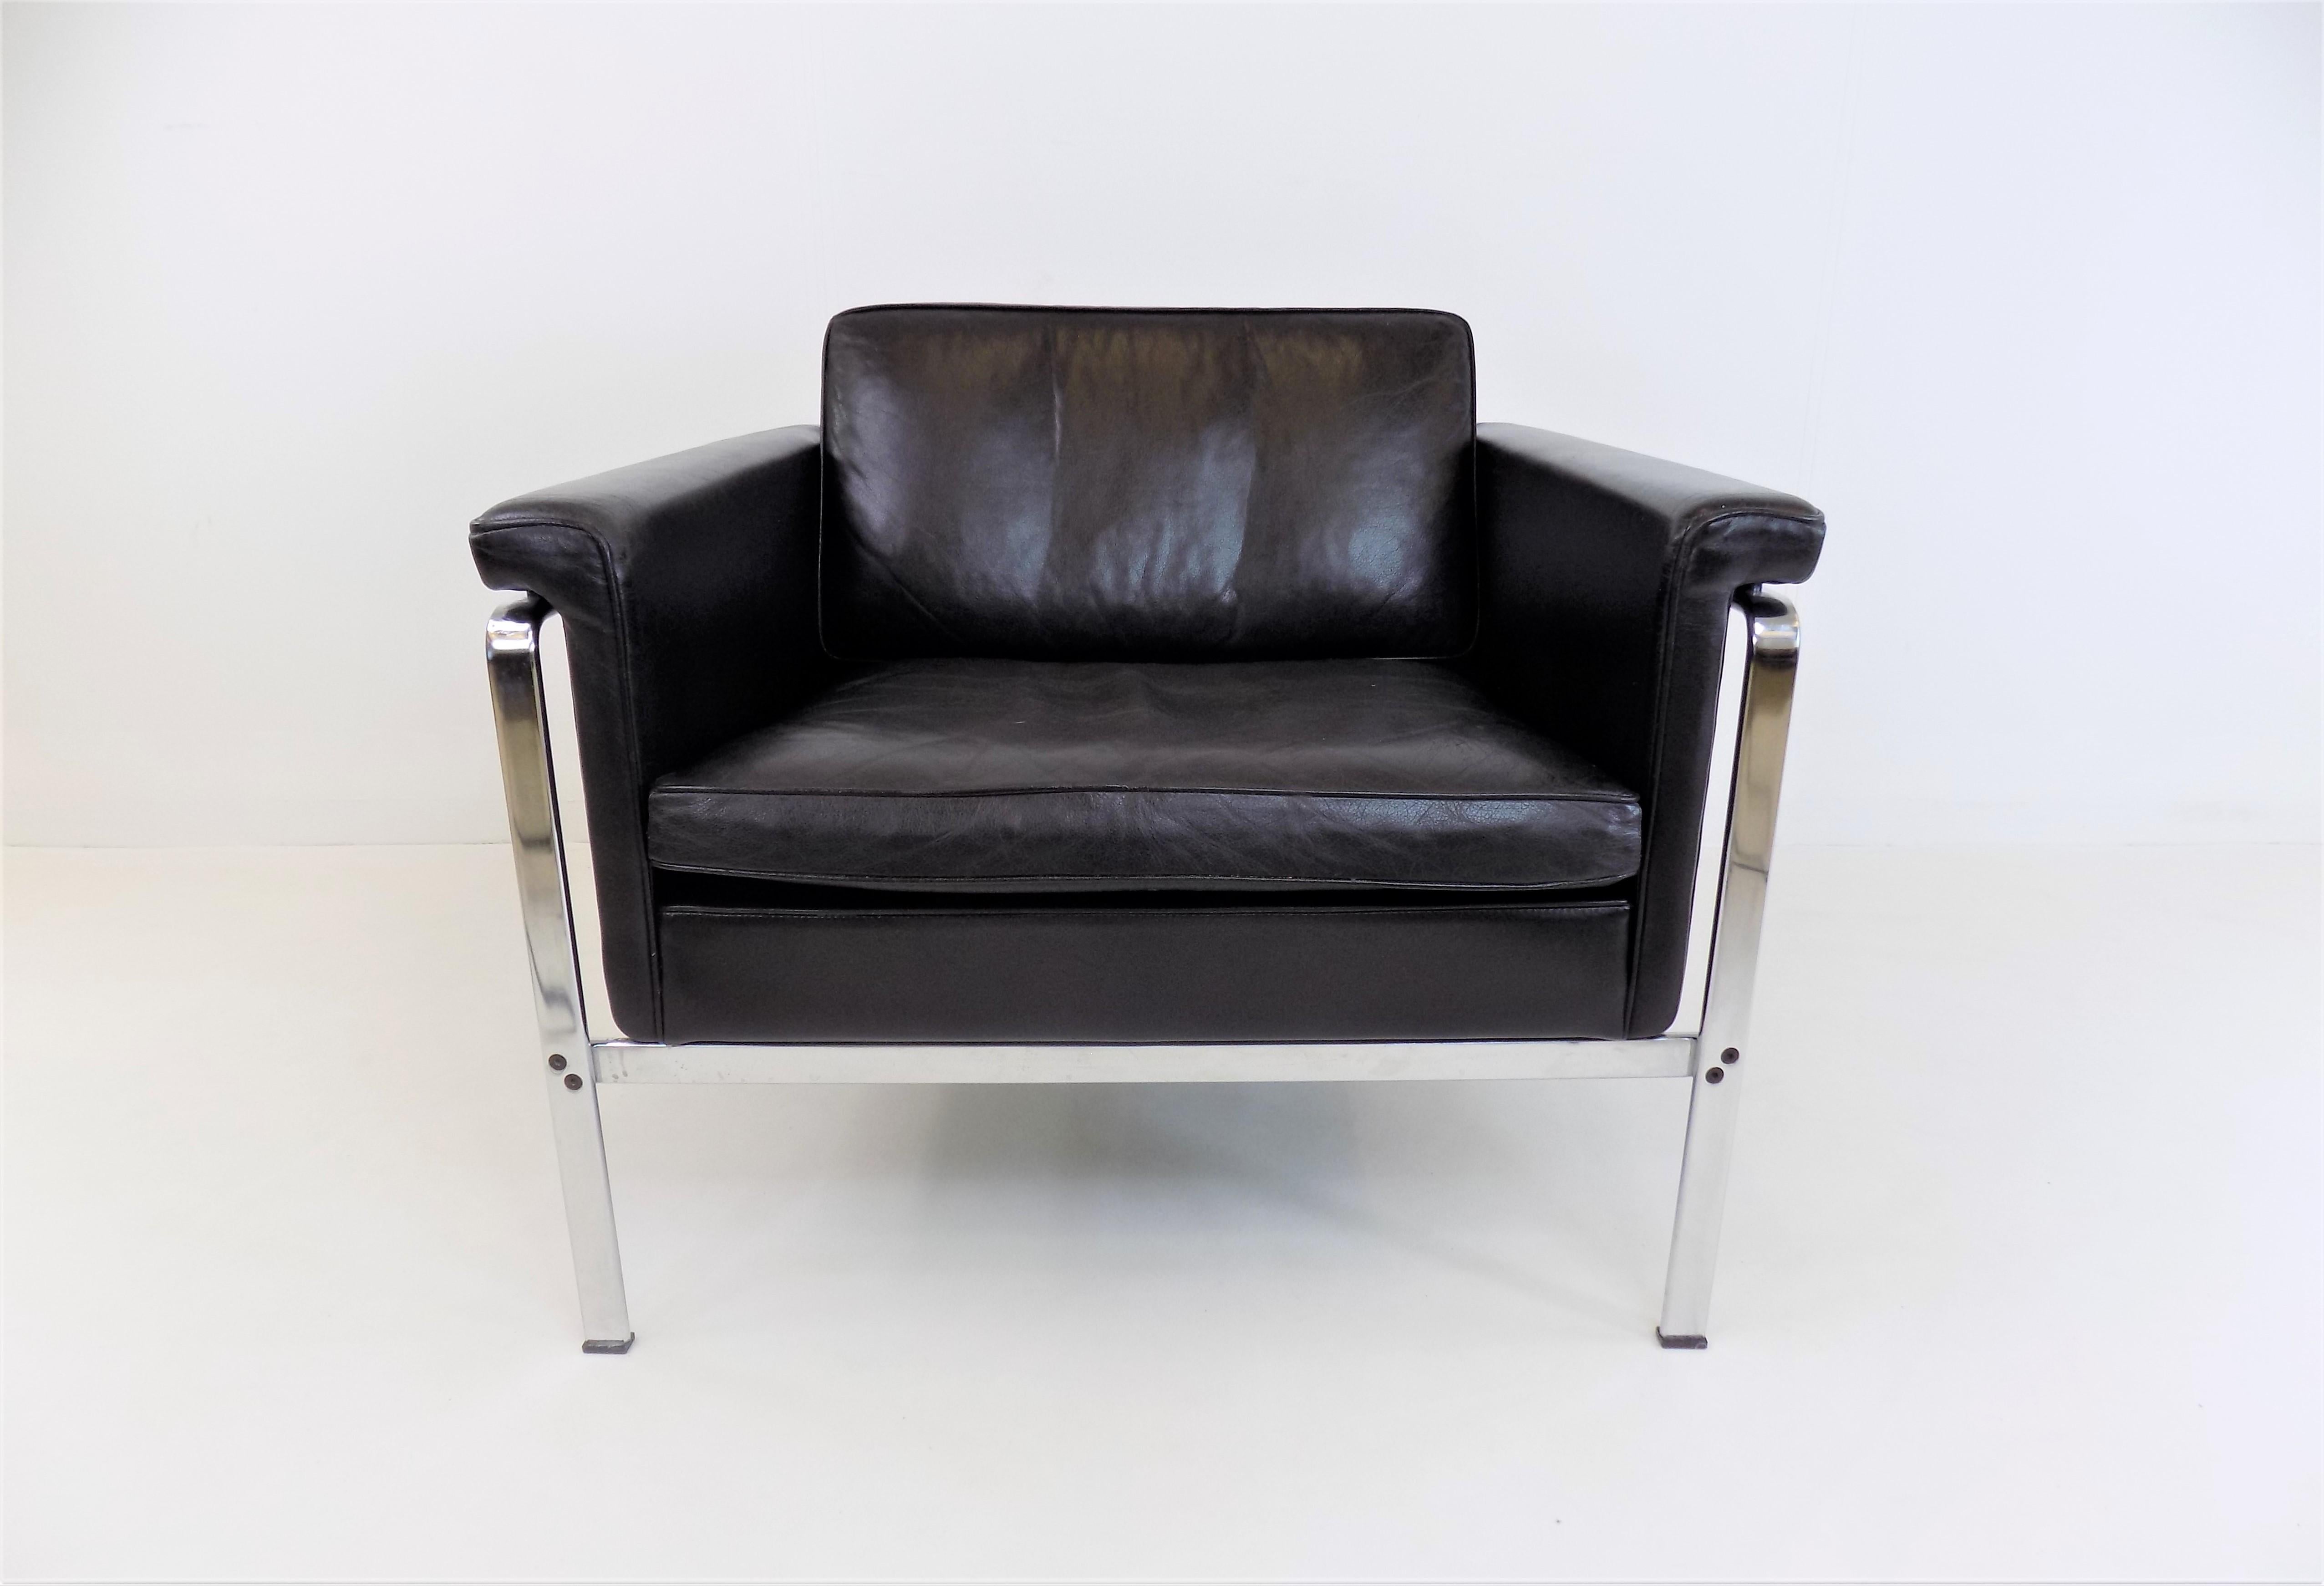 Stainless Steel Kill 6911 leather chair black by Horst Brüning